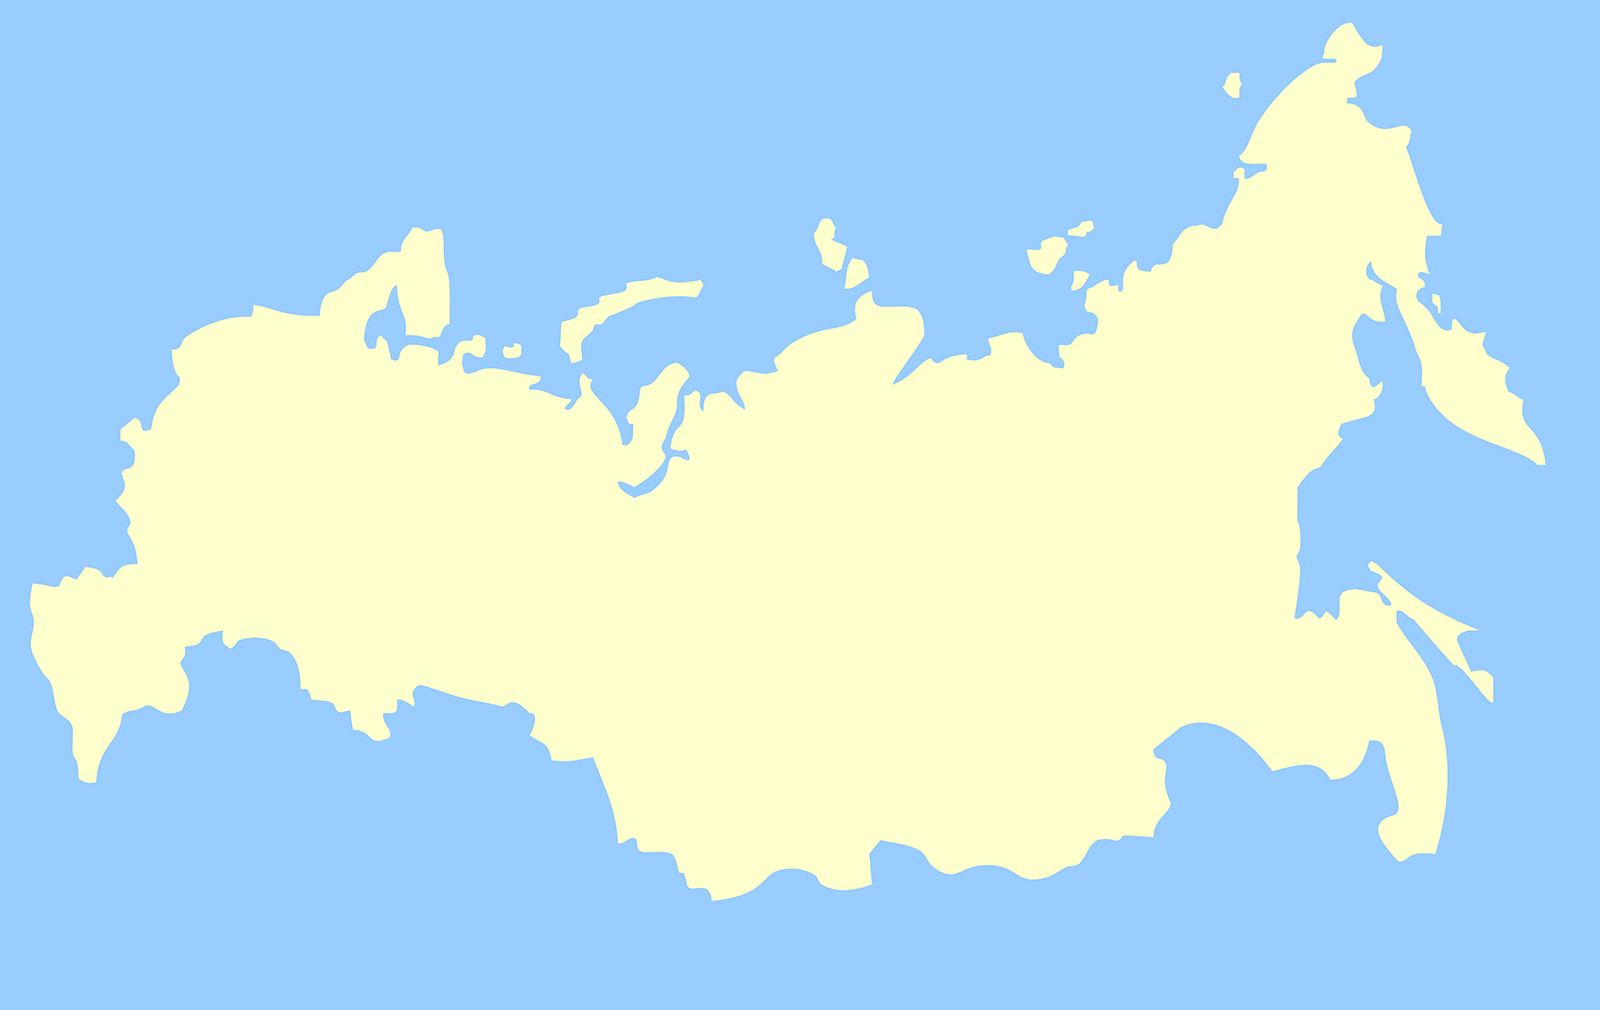 Russia Map - blank Political Russia map with cities